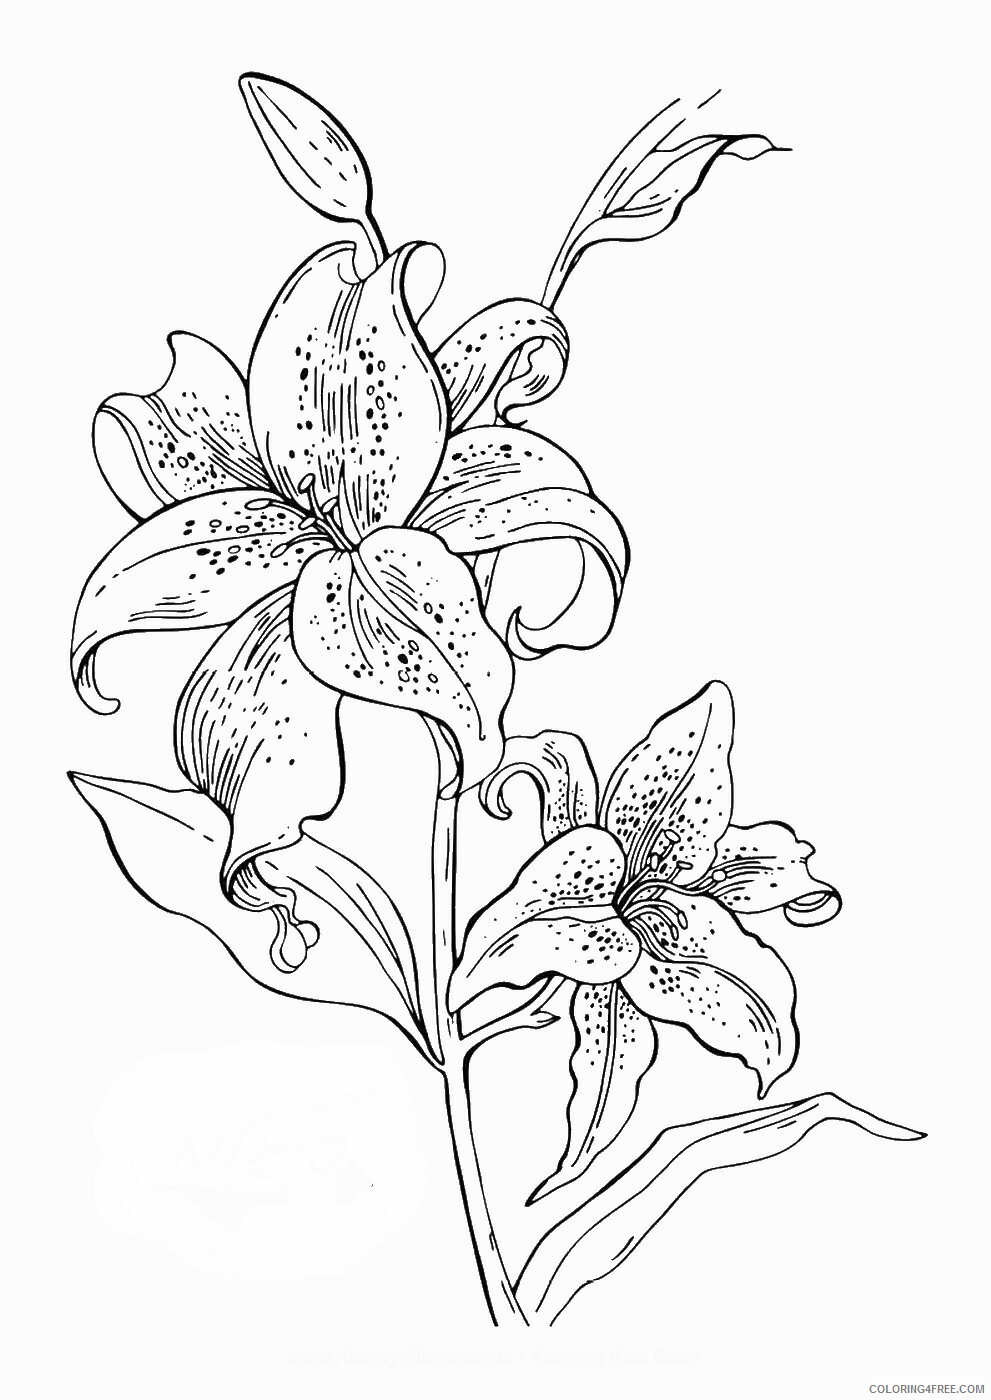 Printable Flower Coloring Pages Flowers Nature flowerc126 Printable 2021 378 Coloring4free